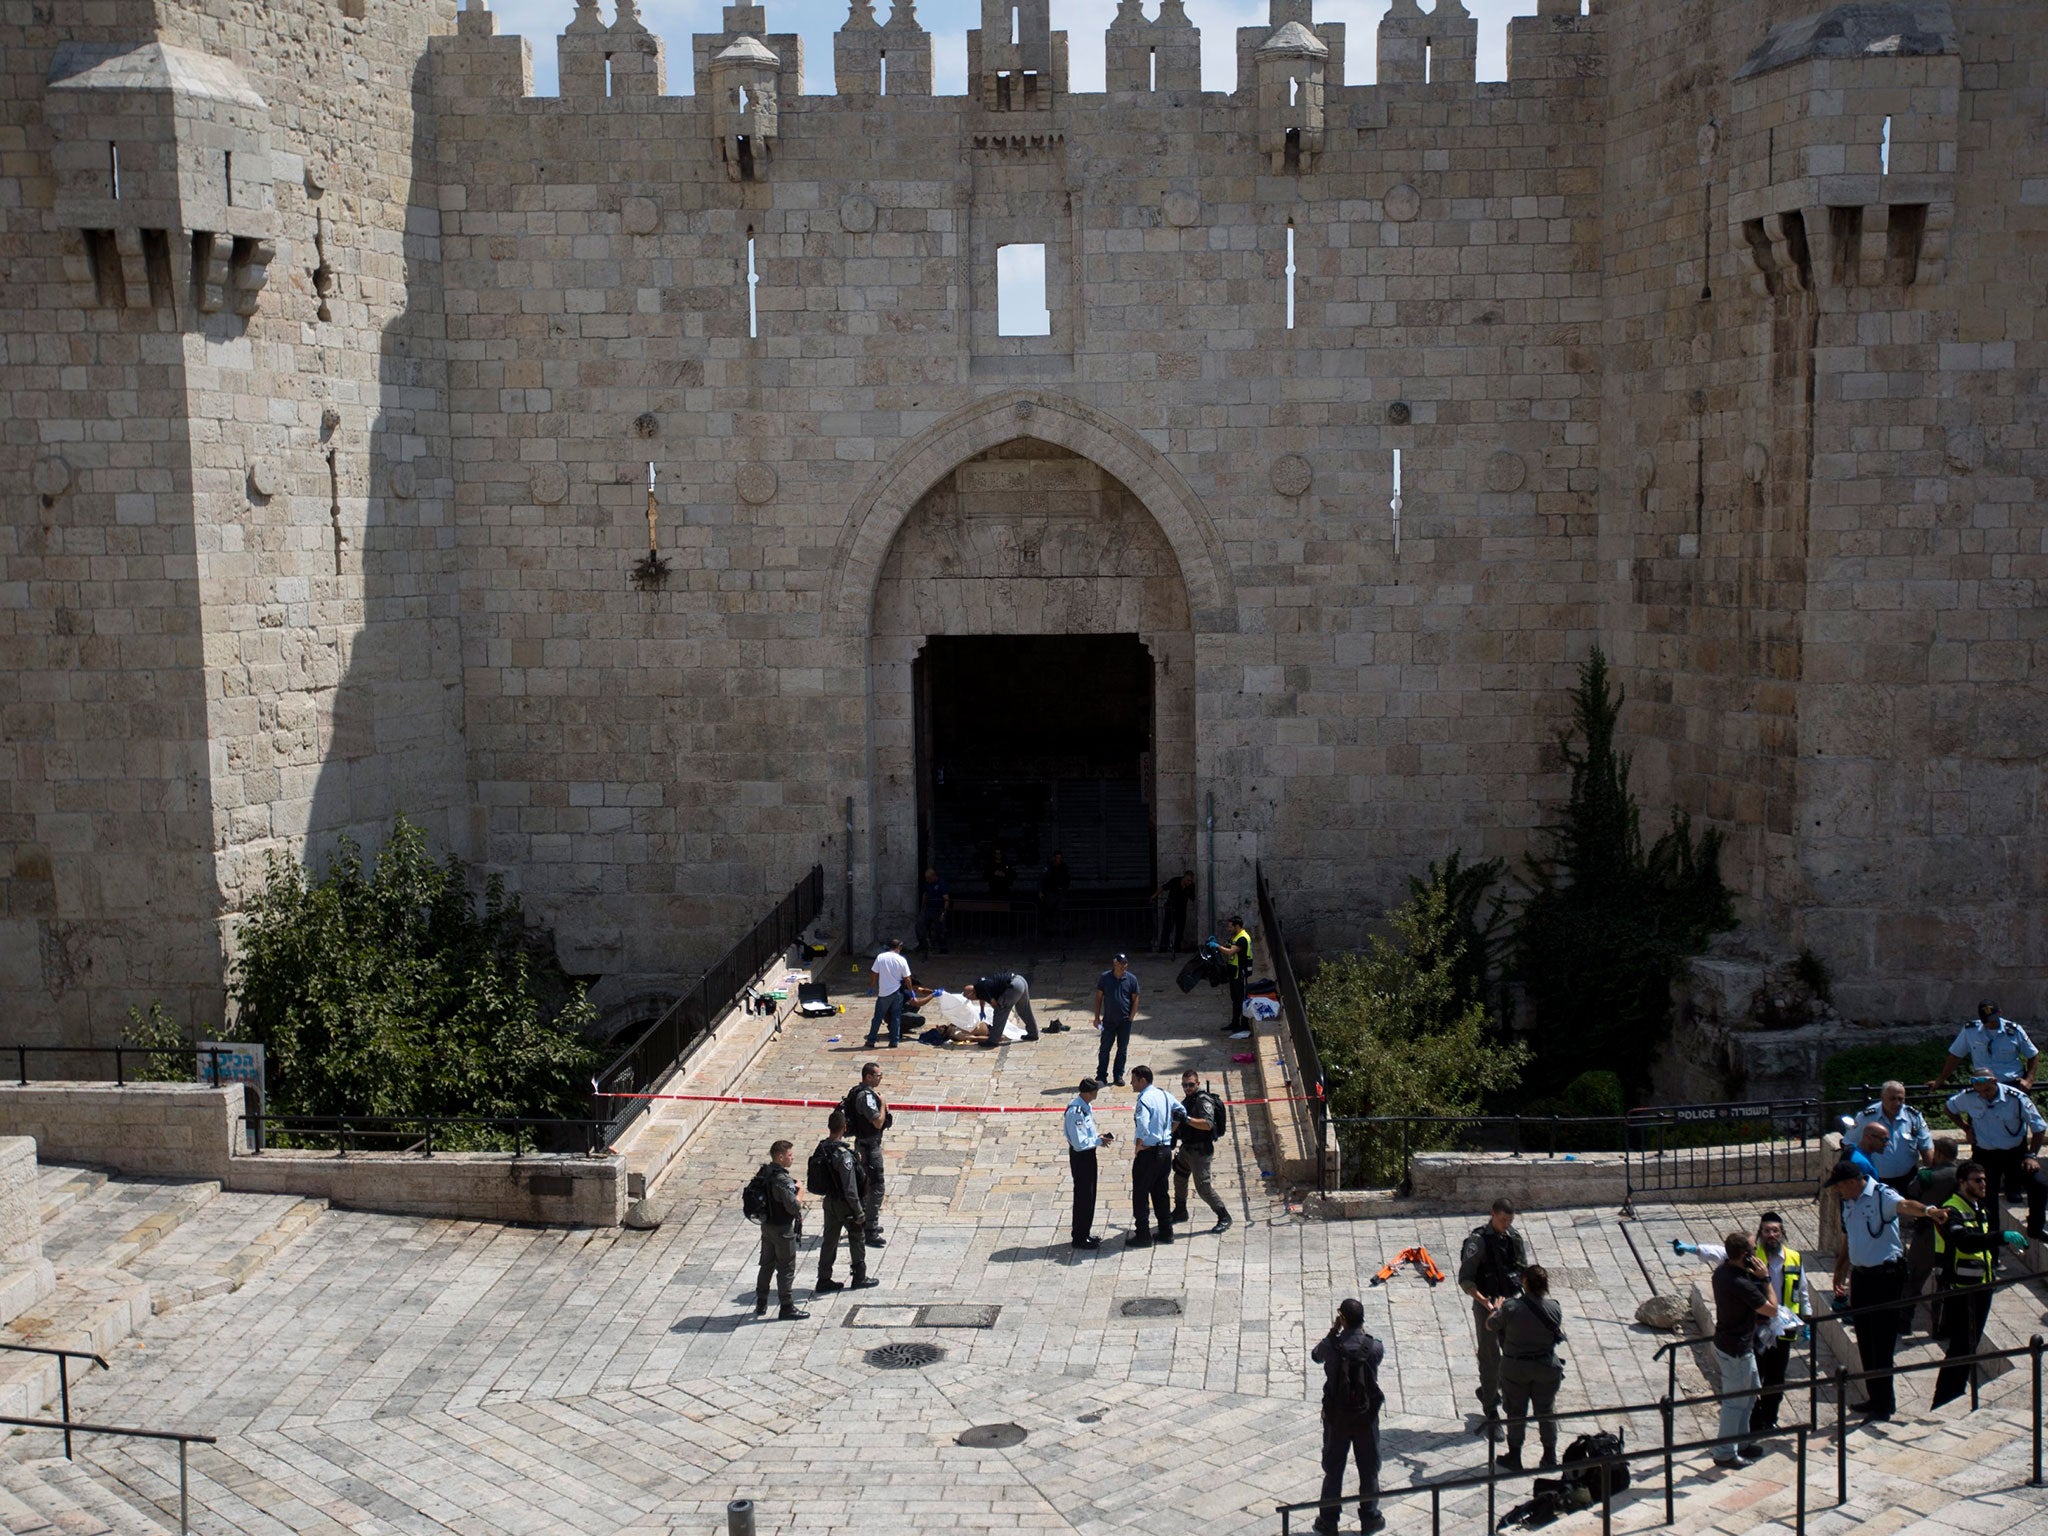 Israeli Border Police surround the body of a man shot while attempting to attack officers with a knife at Damascus Gate in East Jerusalem on 16 September